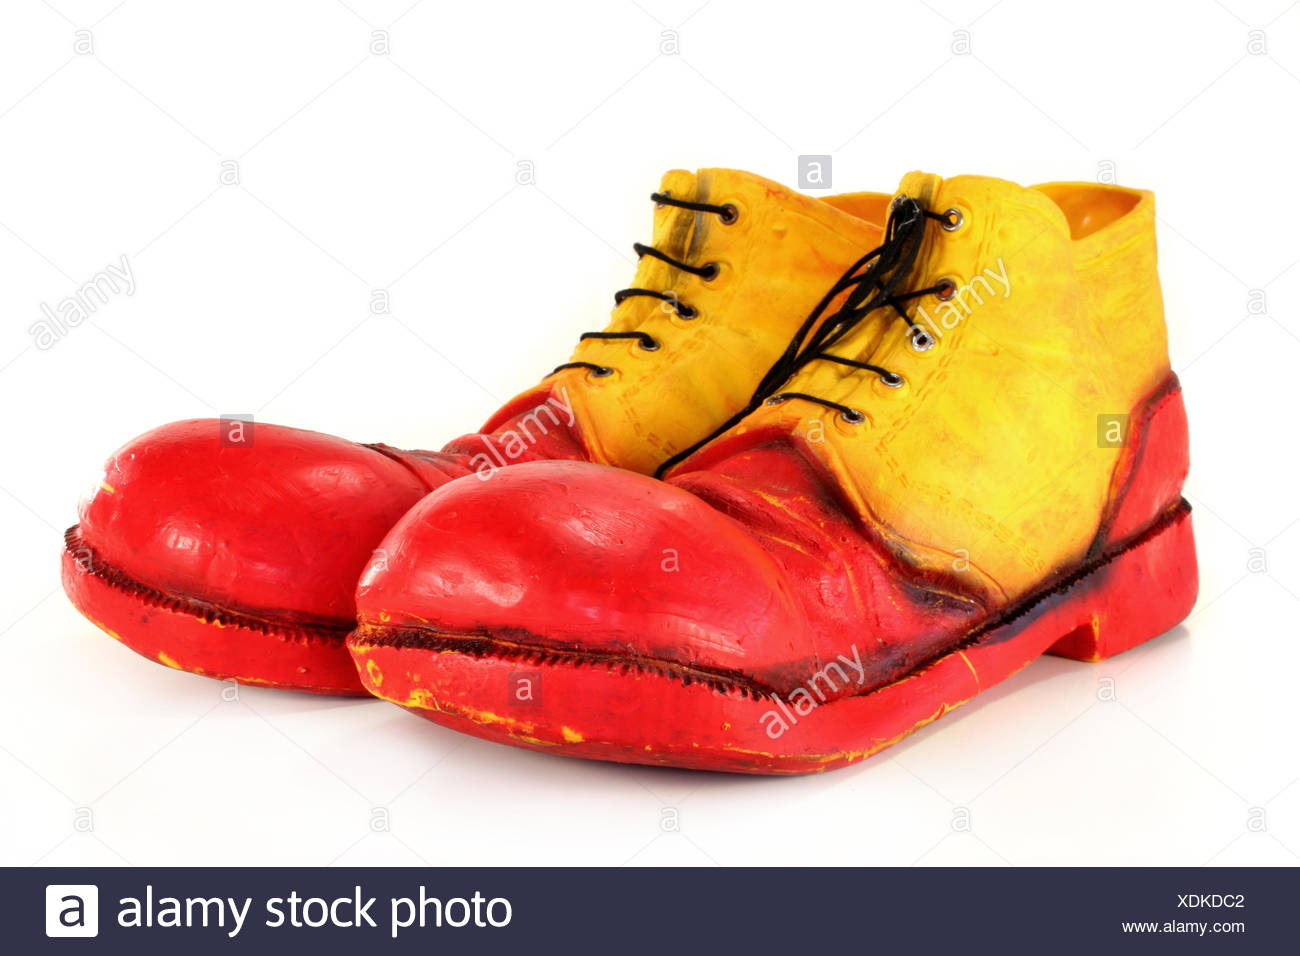 Clown Shoes High Resolution Stock Photography and Images - Alamy